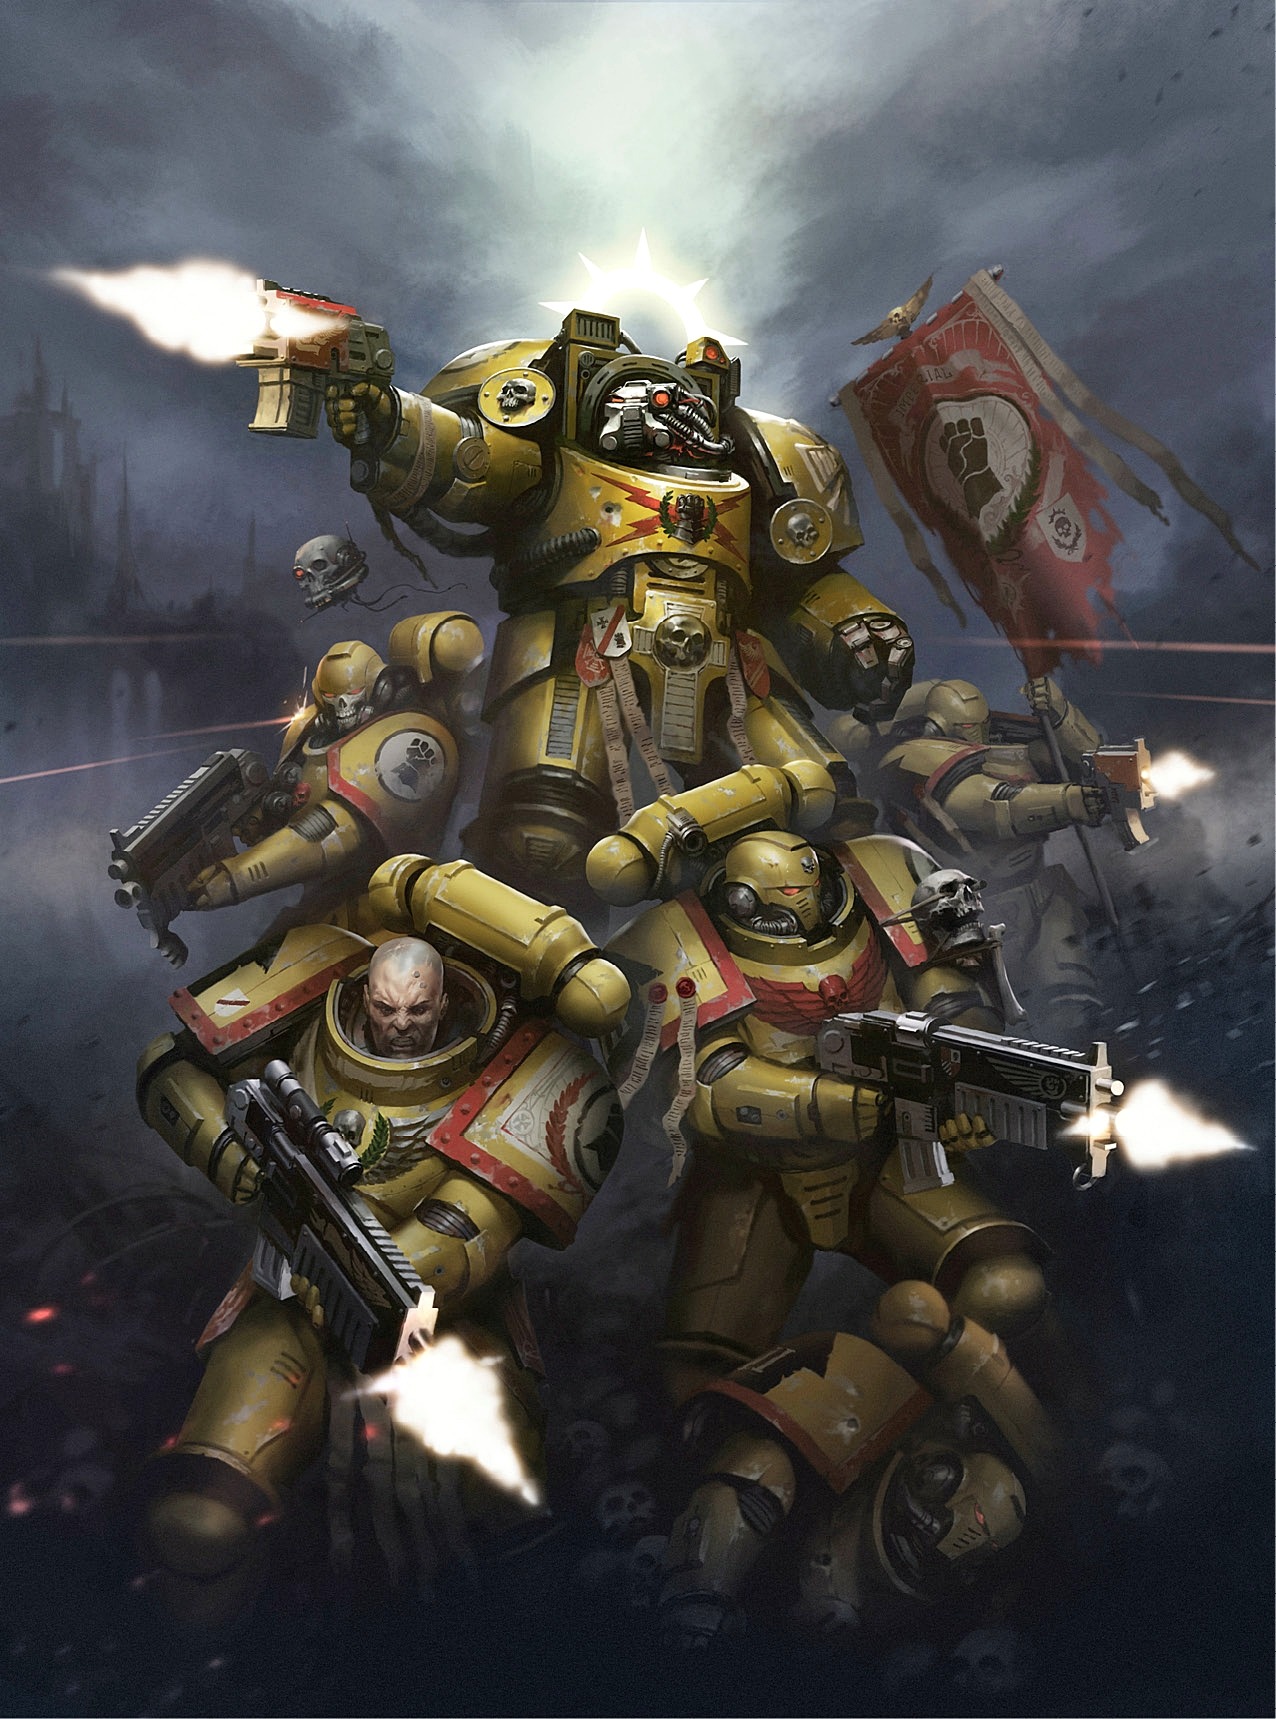 Warhammer 40k artwork — Imperial Fists by...